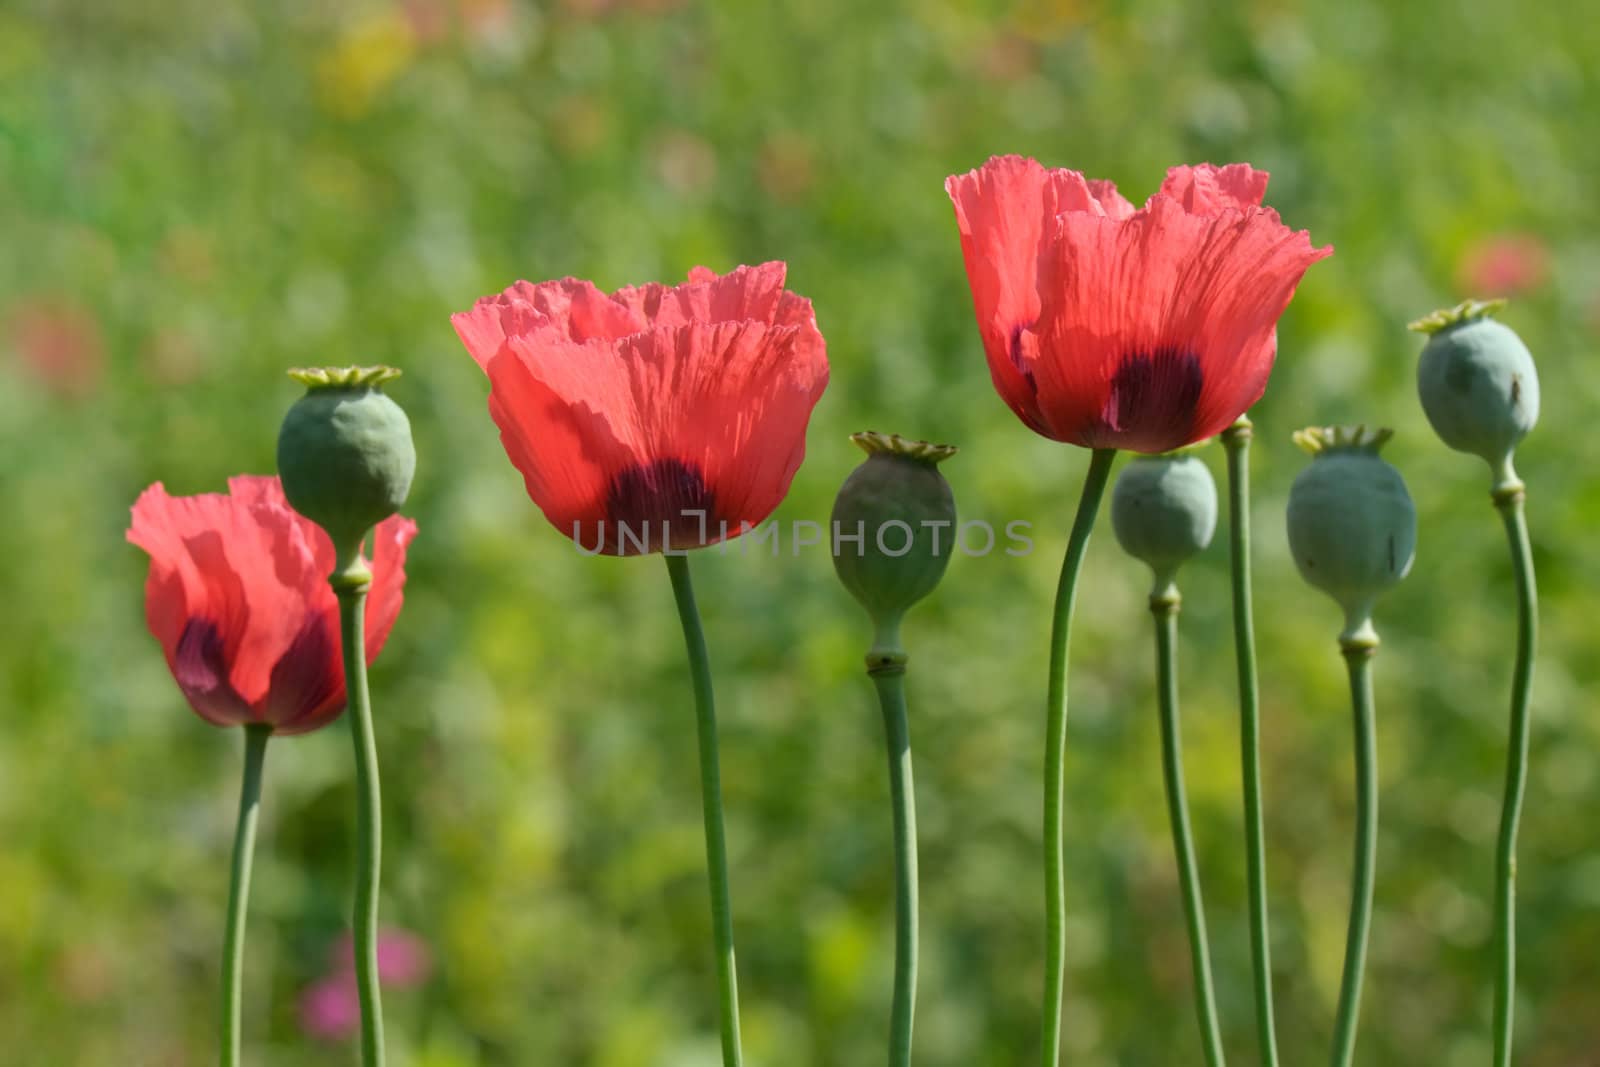 Ornamental red poppy flowers and pods on a sunny day